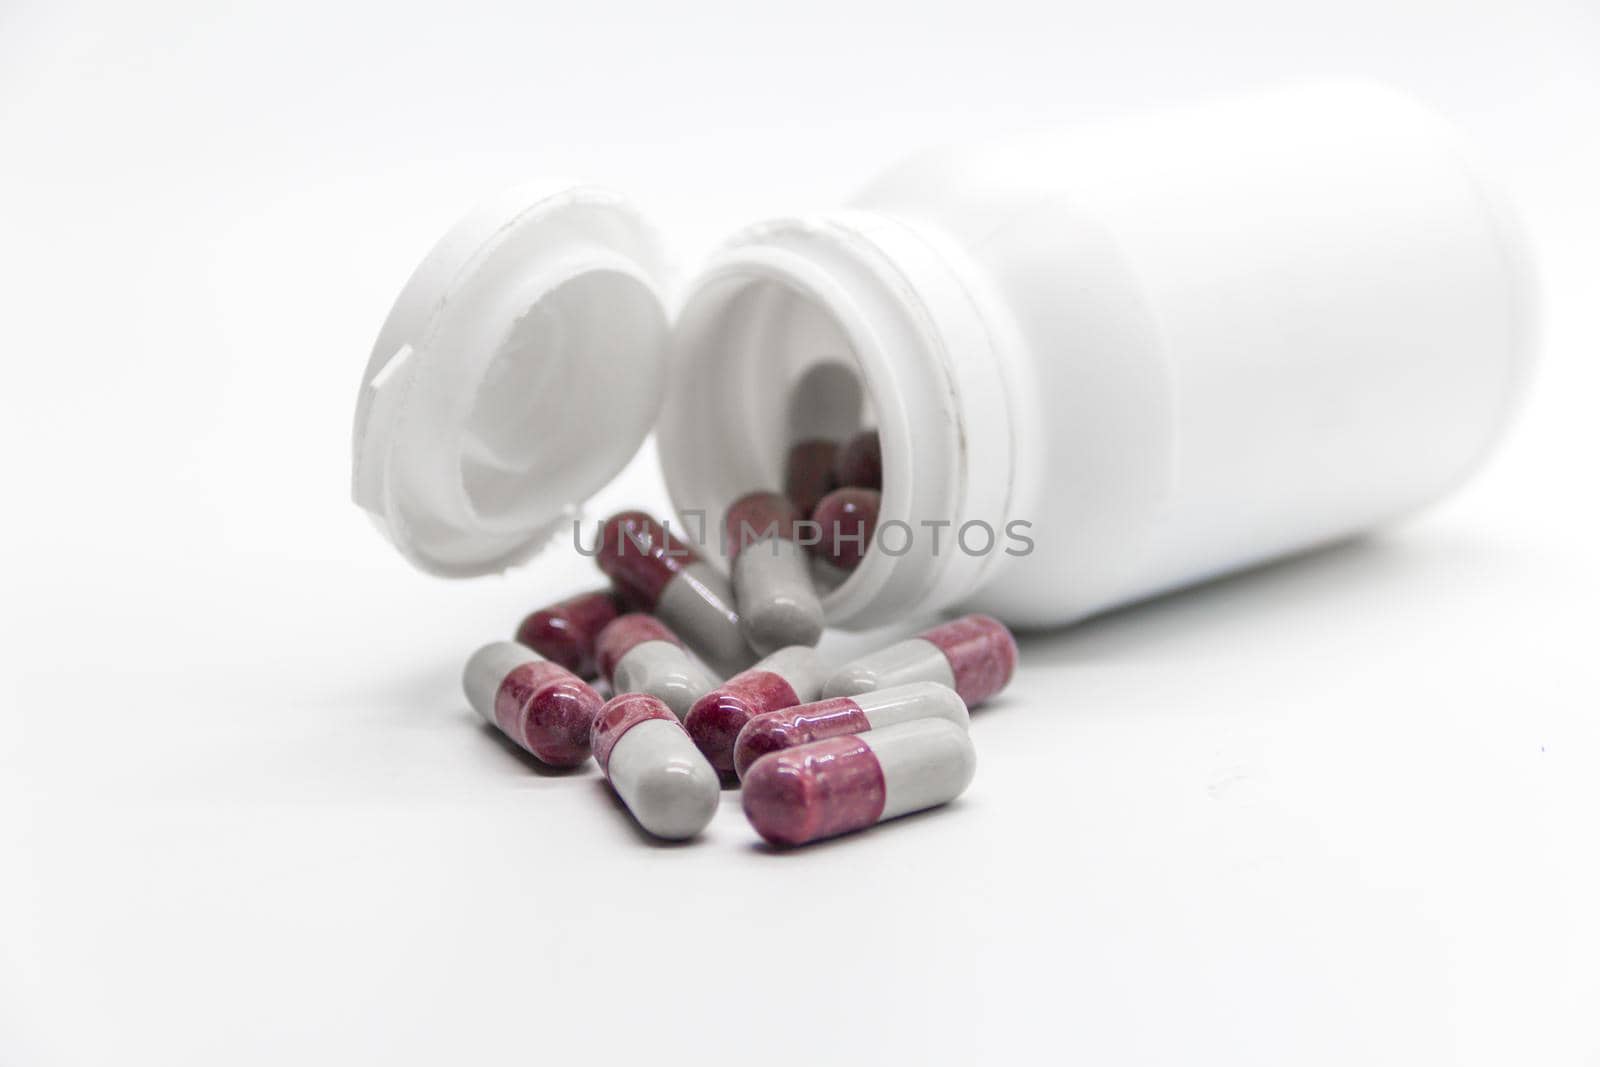 Detail of a bottle of capsules with medical drugs.Concept Medicine, health by GabrielaBertolini